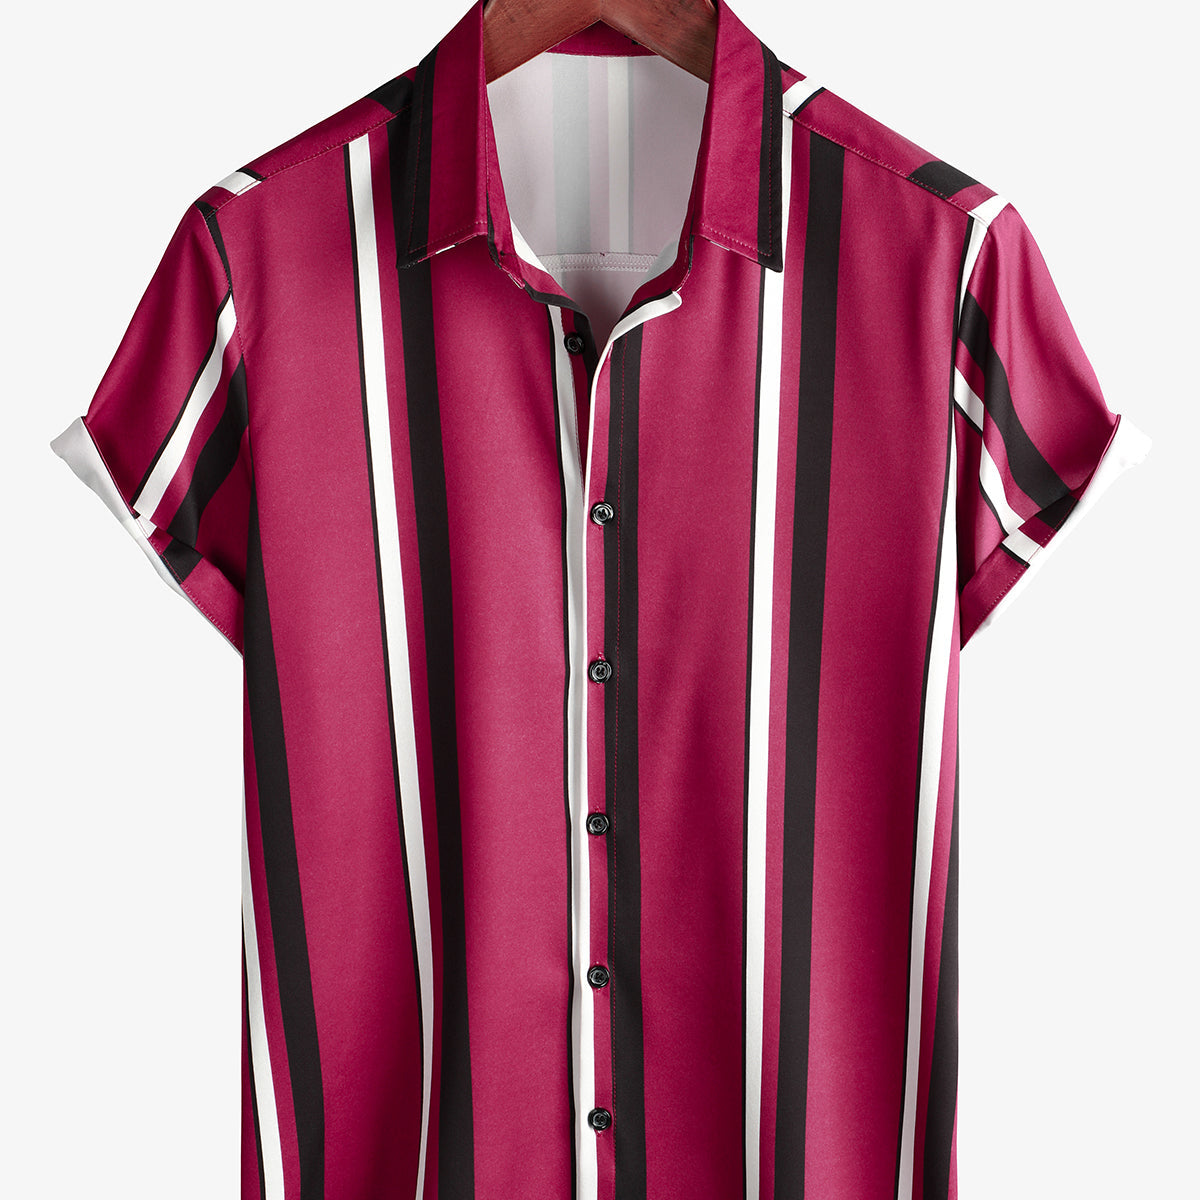 Men's Casual Red Wide Vertical Striped Short Sleeve Button Up Shirt